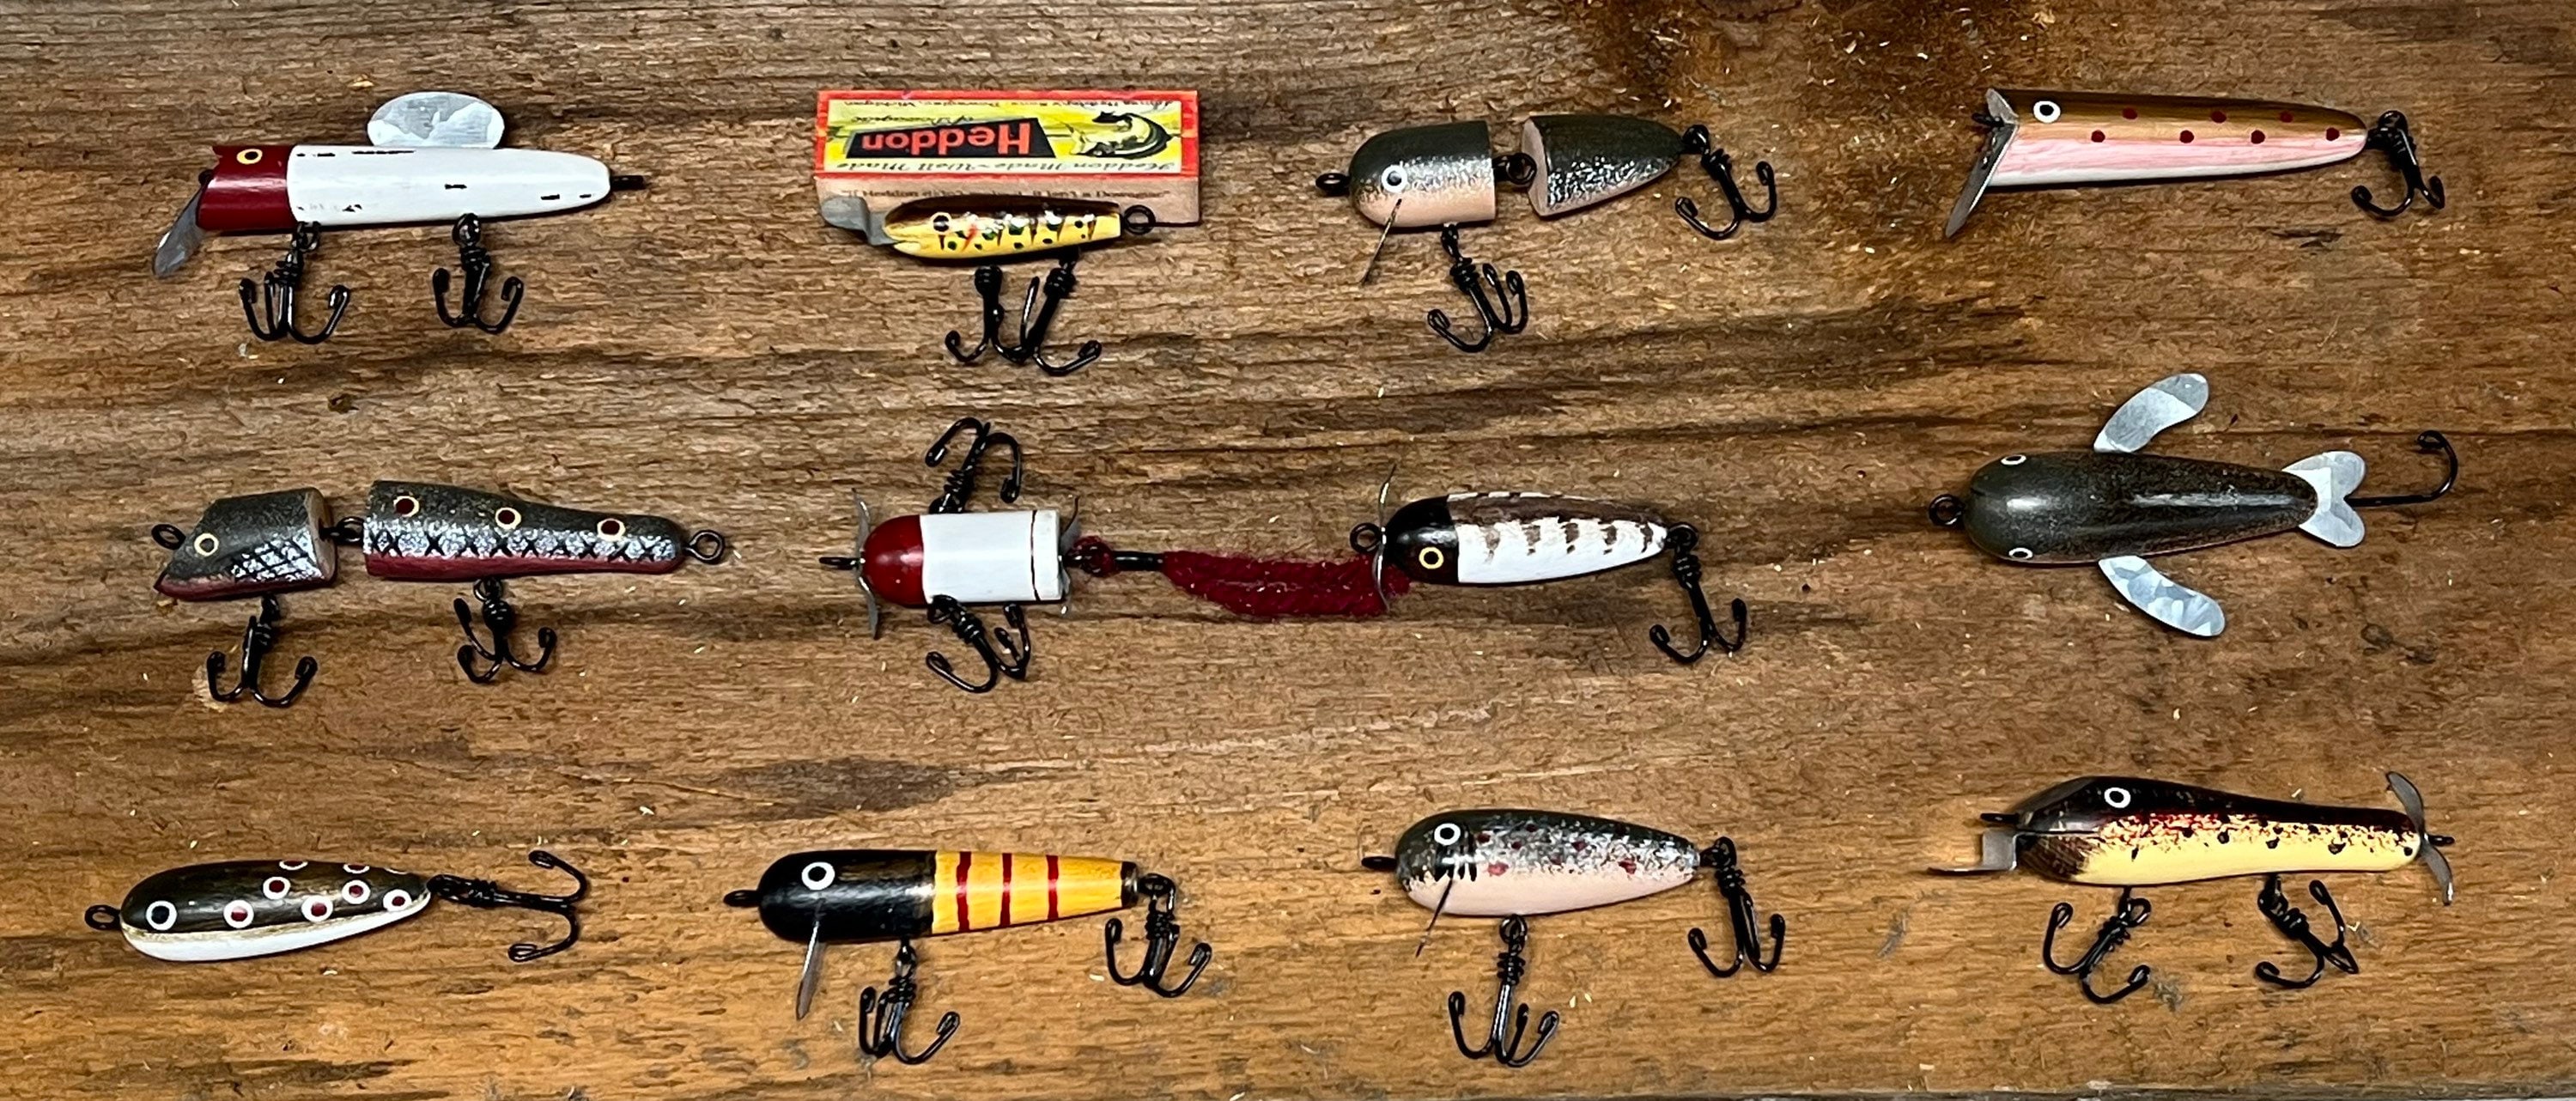 Gar Catcher Rope Lure With Spinner Blade Handmade in the USA 